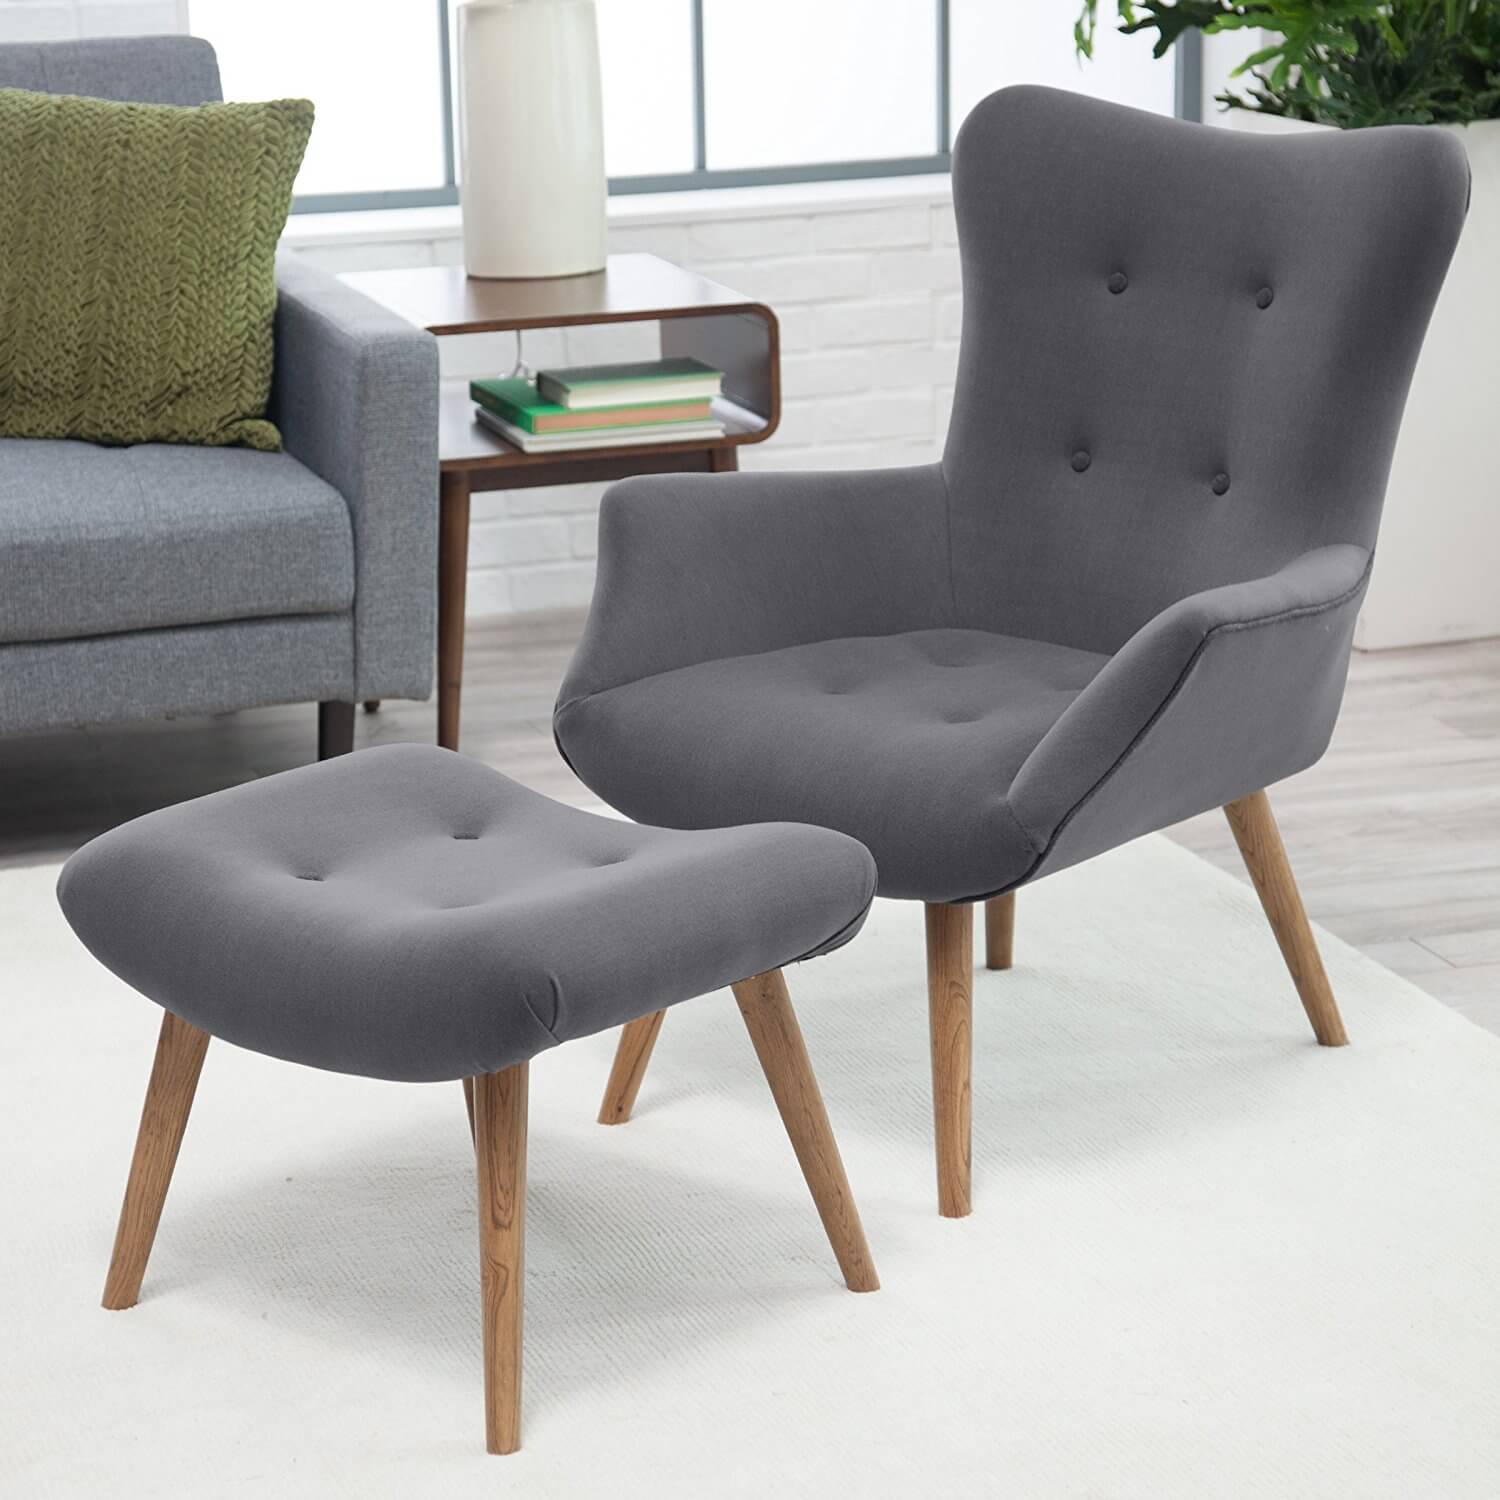 Get List of Modern Occasional Chairs For A Comfort Seating